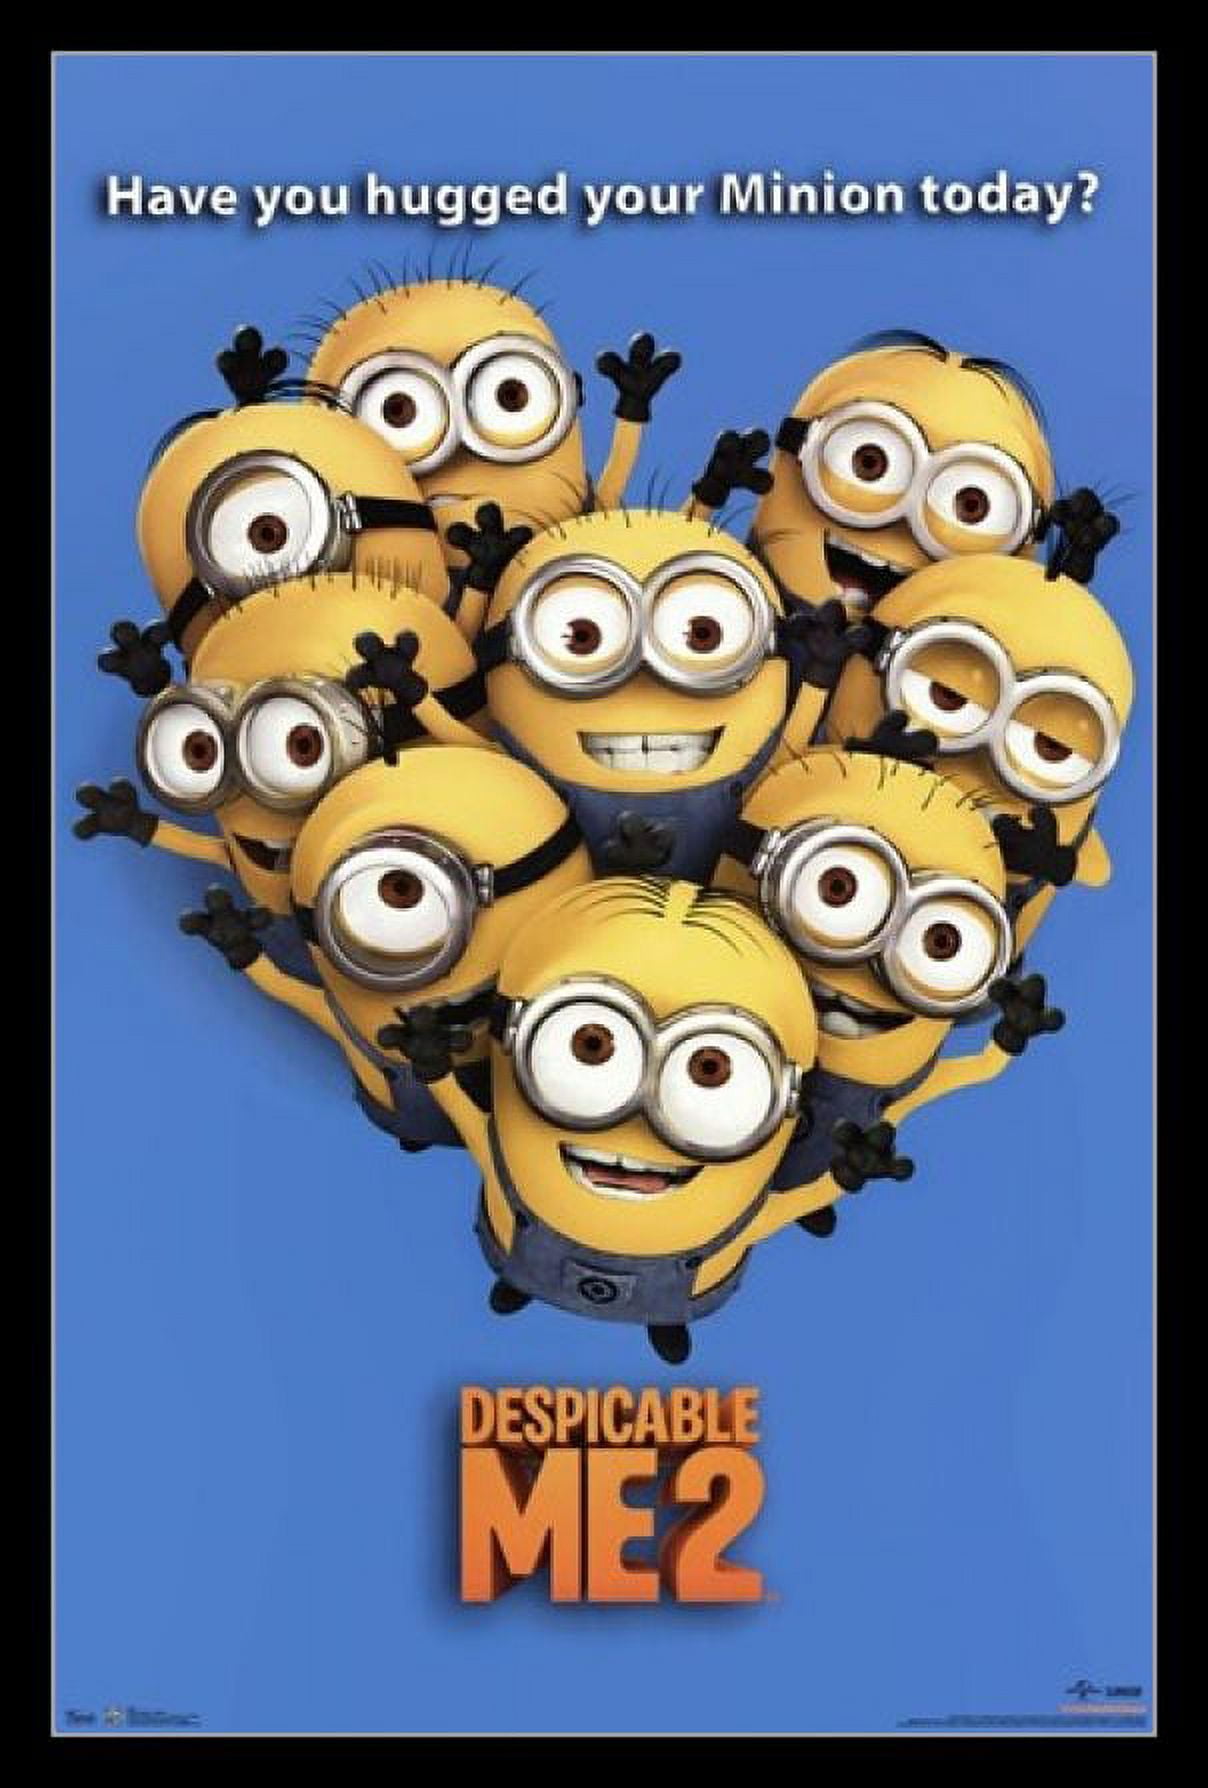 RoomMates Minions Despicable Me 2 Peel and Stick Wall Decals, Rmk2080scs, Yellow/Blue